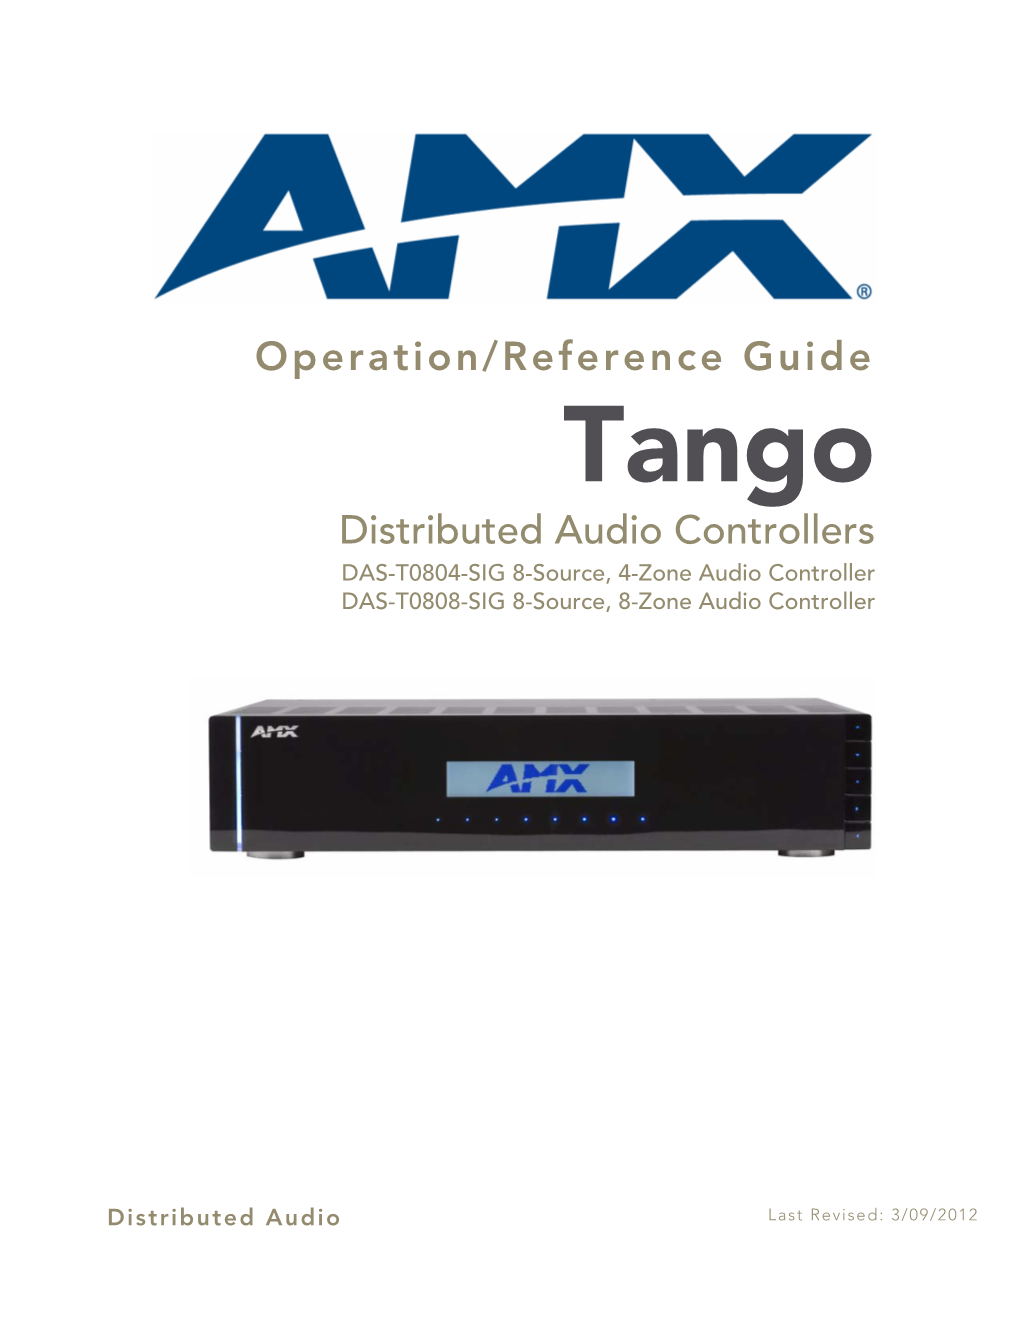 Operation/Reference Guide Tango Distributed Audio Controllers DAS-T0804-SIG 8-Source, 4-Zone Audio Controller DAS-T0808-SIG 8-Source, 8-Zone Audio Controller